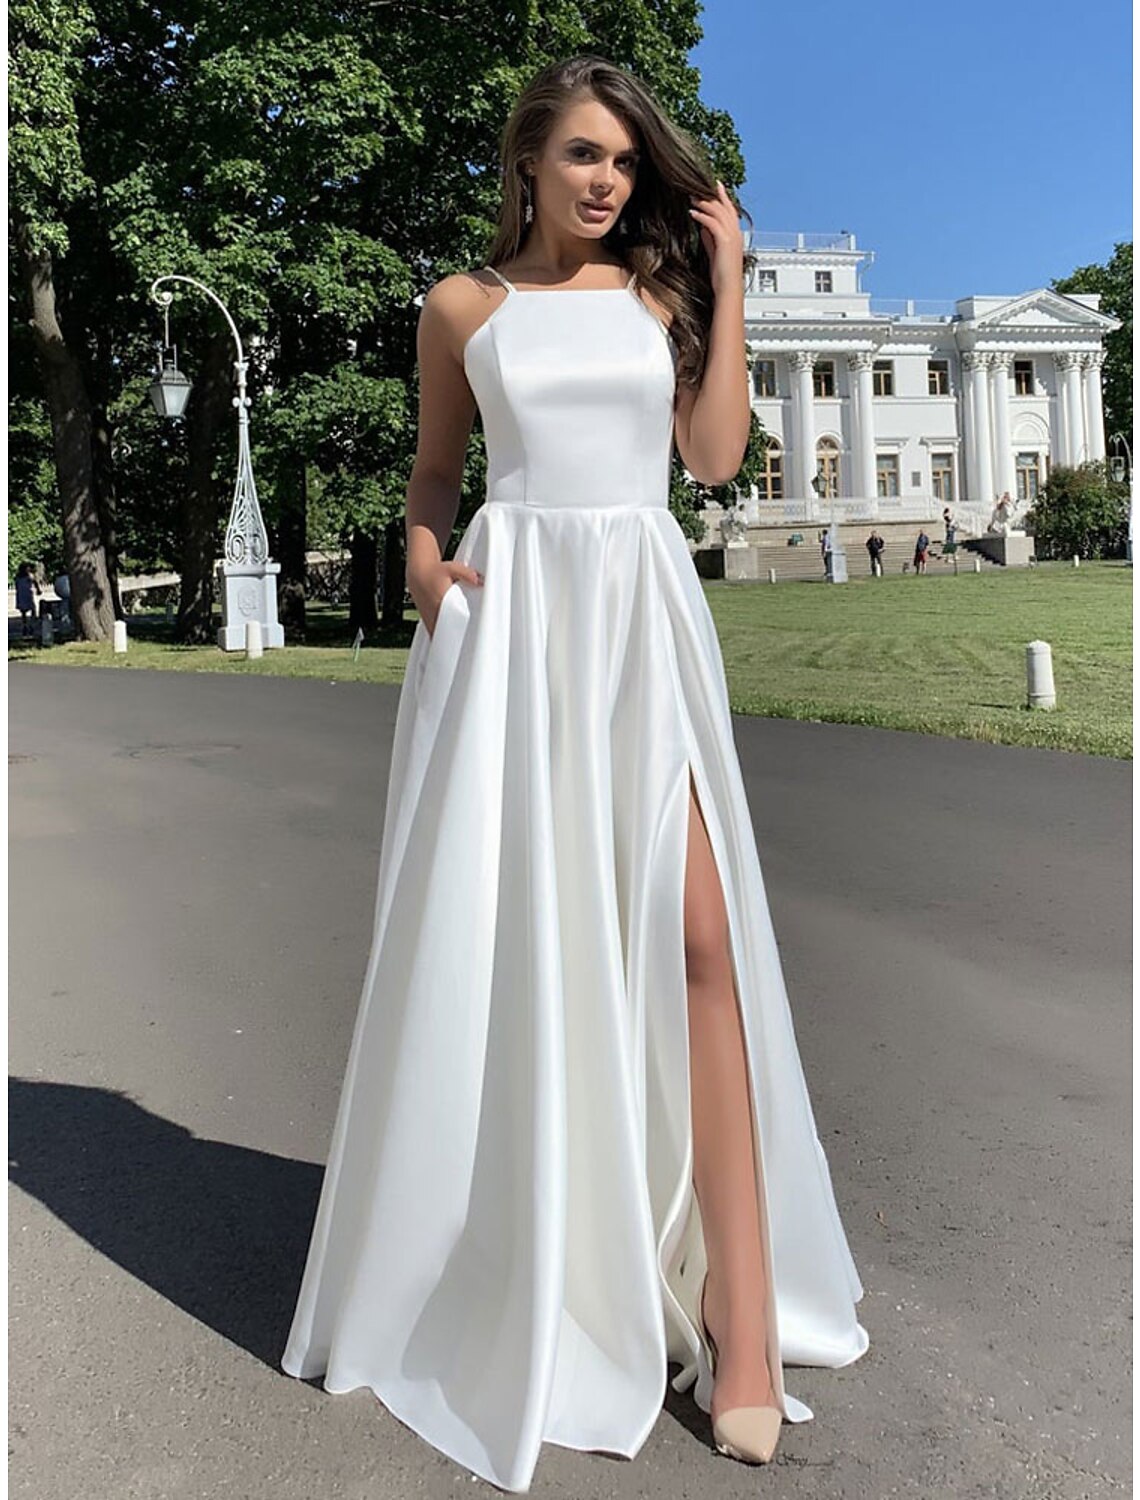 Mermaid / Trumpet Evening Gown Elegant Dress Wedding Guest Floor Length Sleeveless Spaghetti Strap Jersey Crisscross Back with Strappy